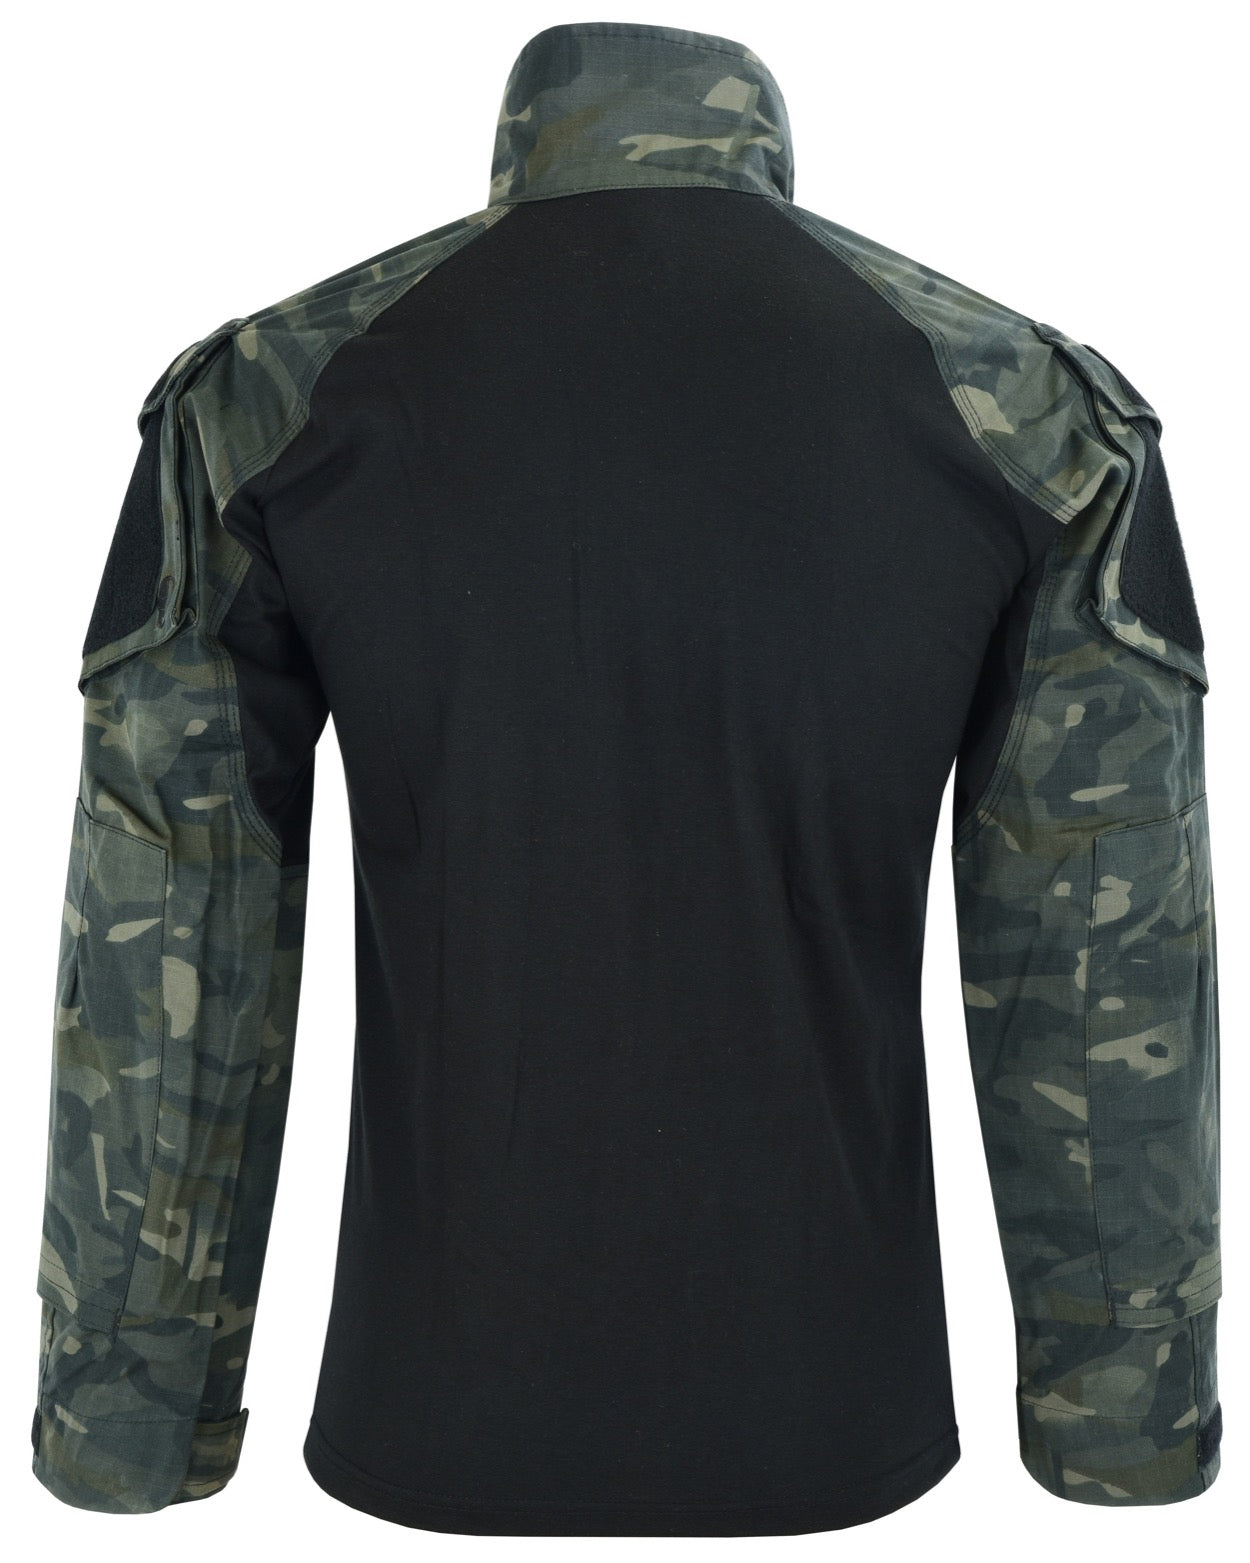 Tactical Zone  HYBRID TACTICAL  COMBAT SHIRT SIZE 3XL+ UTP DARKNIGHT BACK